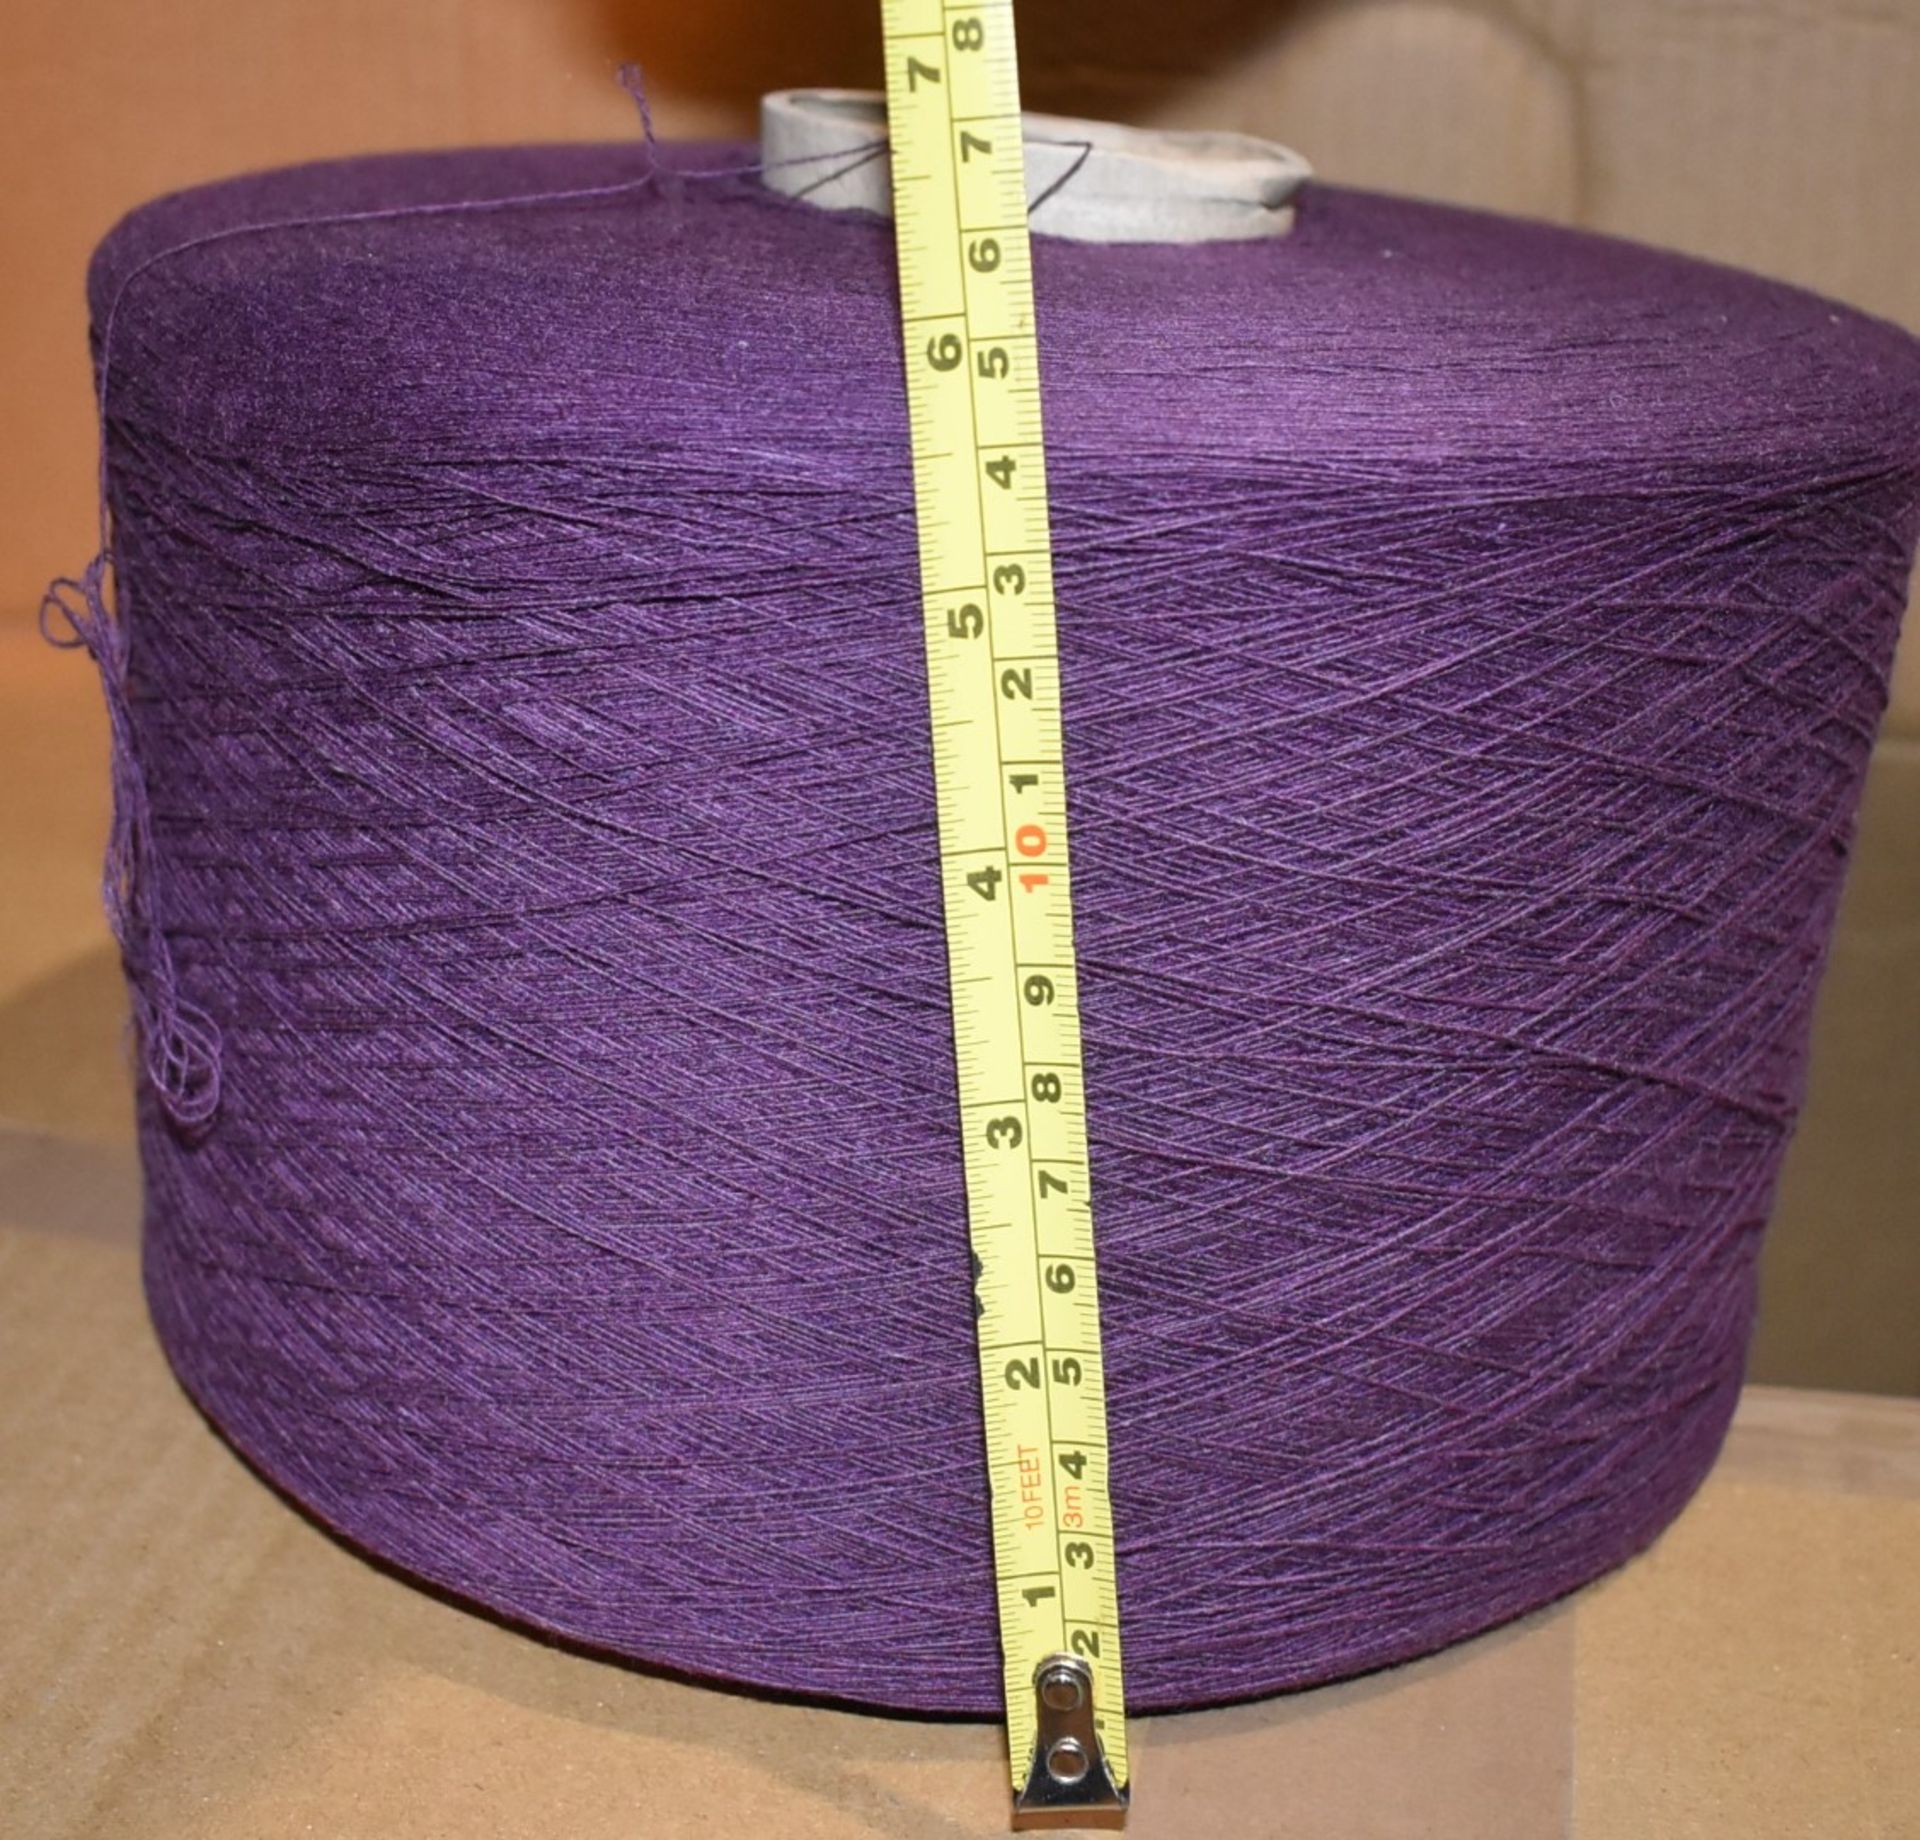 6 x Cones of 1/13 MicroCotton Knitting Yarn - Purple - Approx Weight: 2,300g - New Stock ABL Yarn - Image 14 of 15